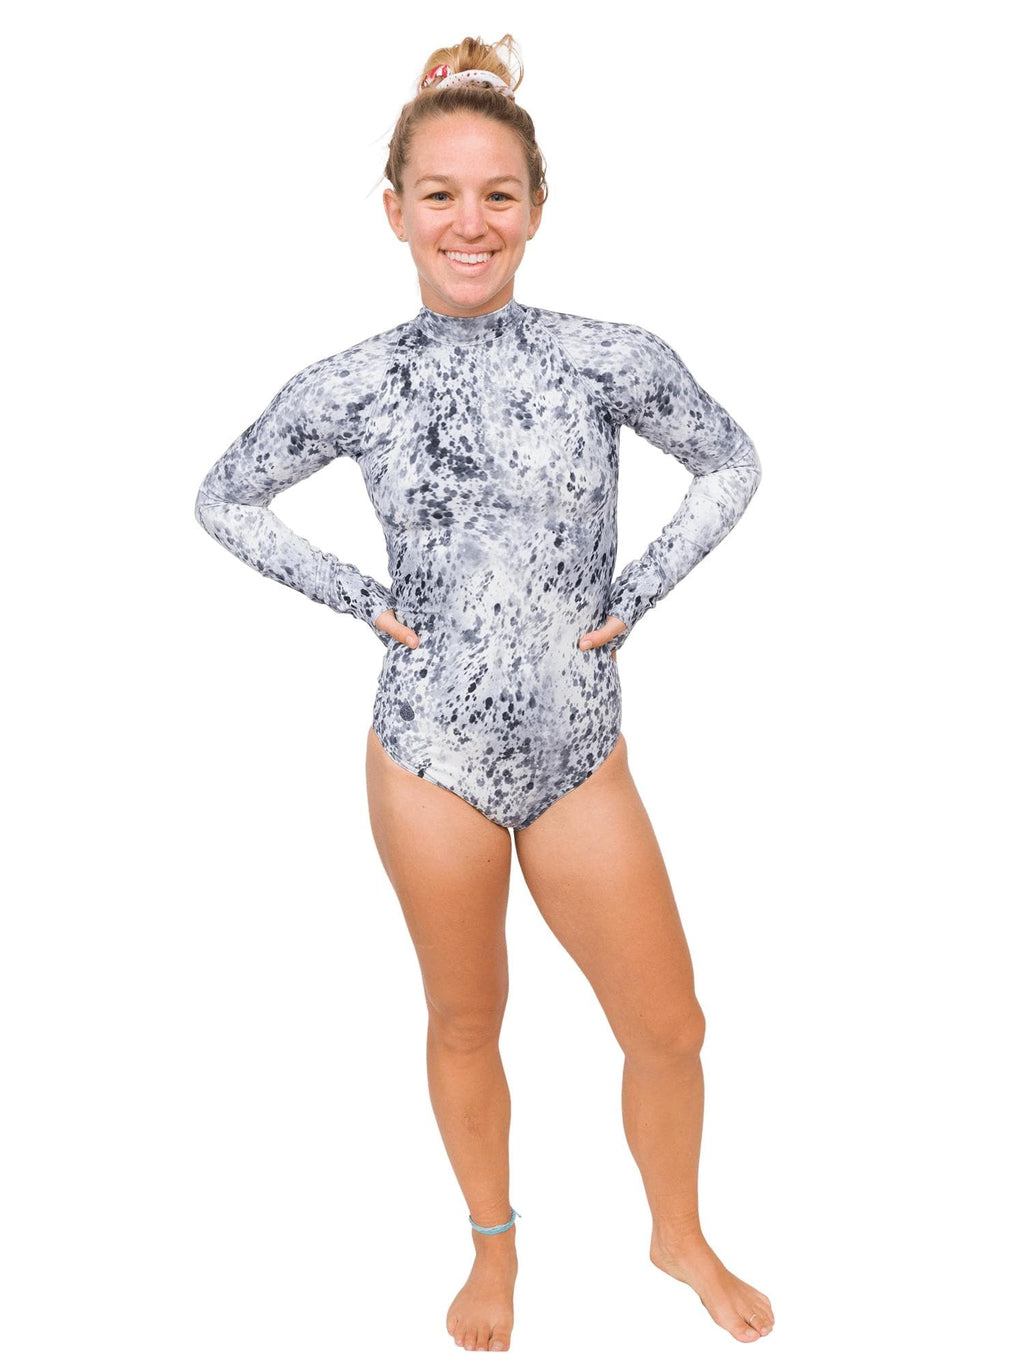 Model: Erin is a coral ecologist and Program Manager here at Waterlust. She 4&#39;11&quot;, 110 lbs, 32A and is wearing an XS.